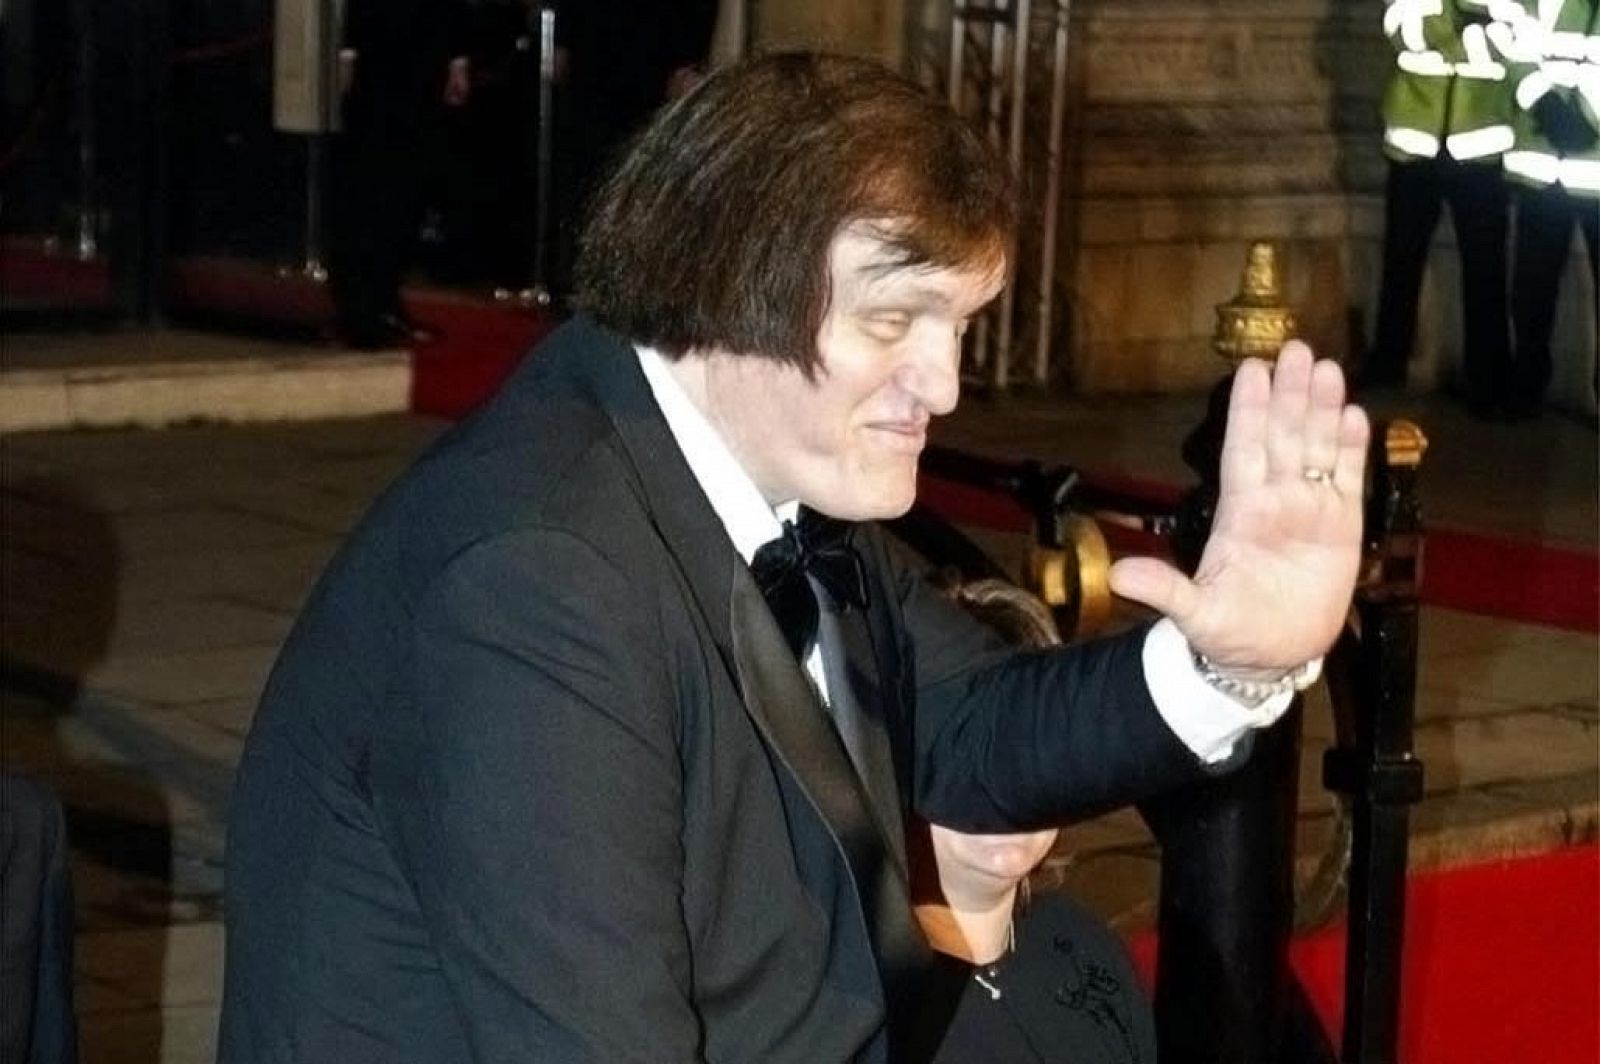 Richard Kiel, who played Jaws in the film Moonraker arrives for the World Premiere of the latest Bond film "Die Another Day" in London's Royal Albert Hall in this file photo